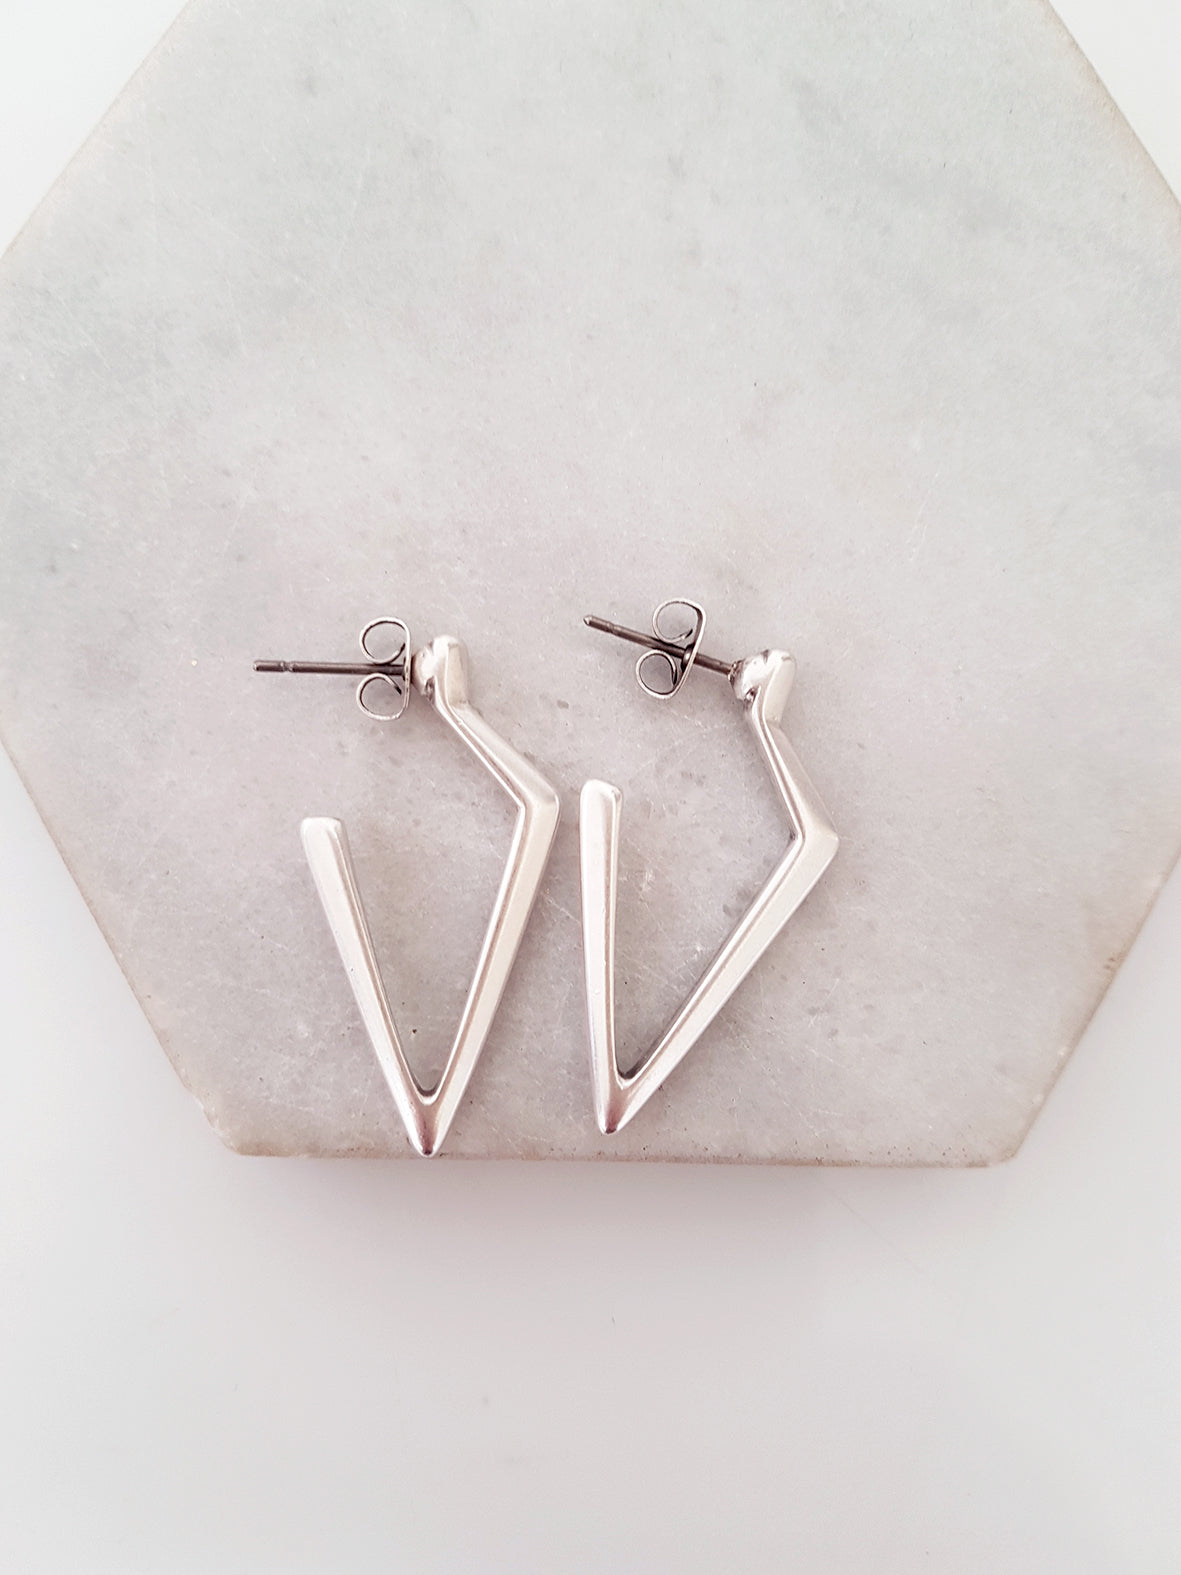 V-shaped earring with titanium stud, pack of 3 pairs